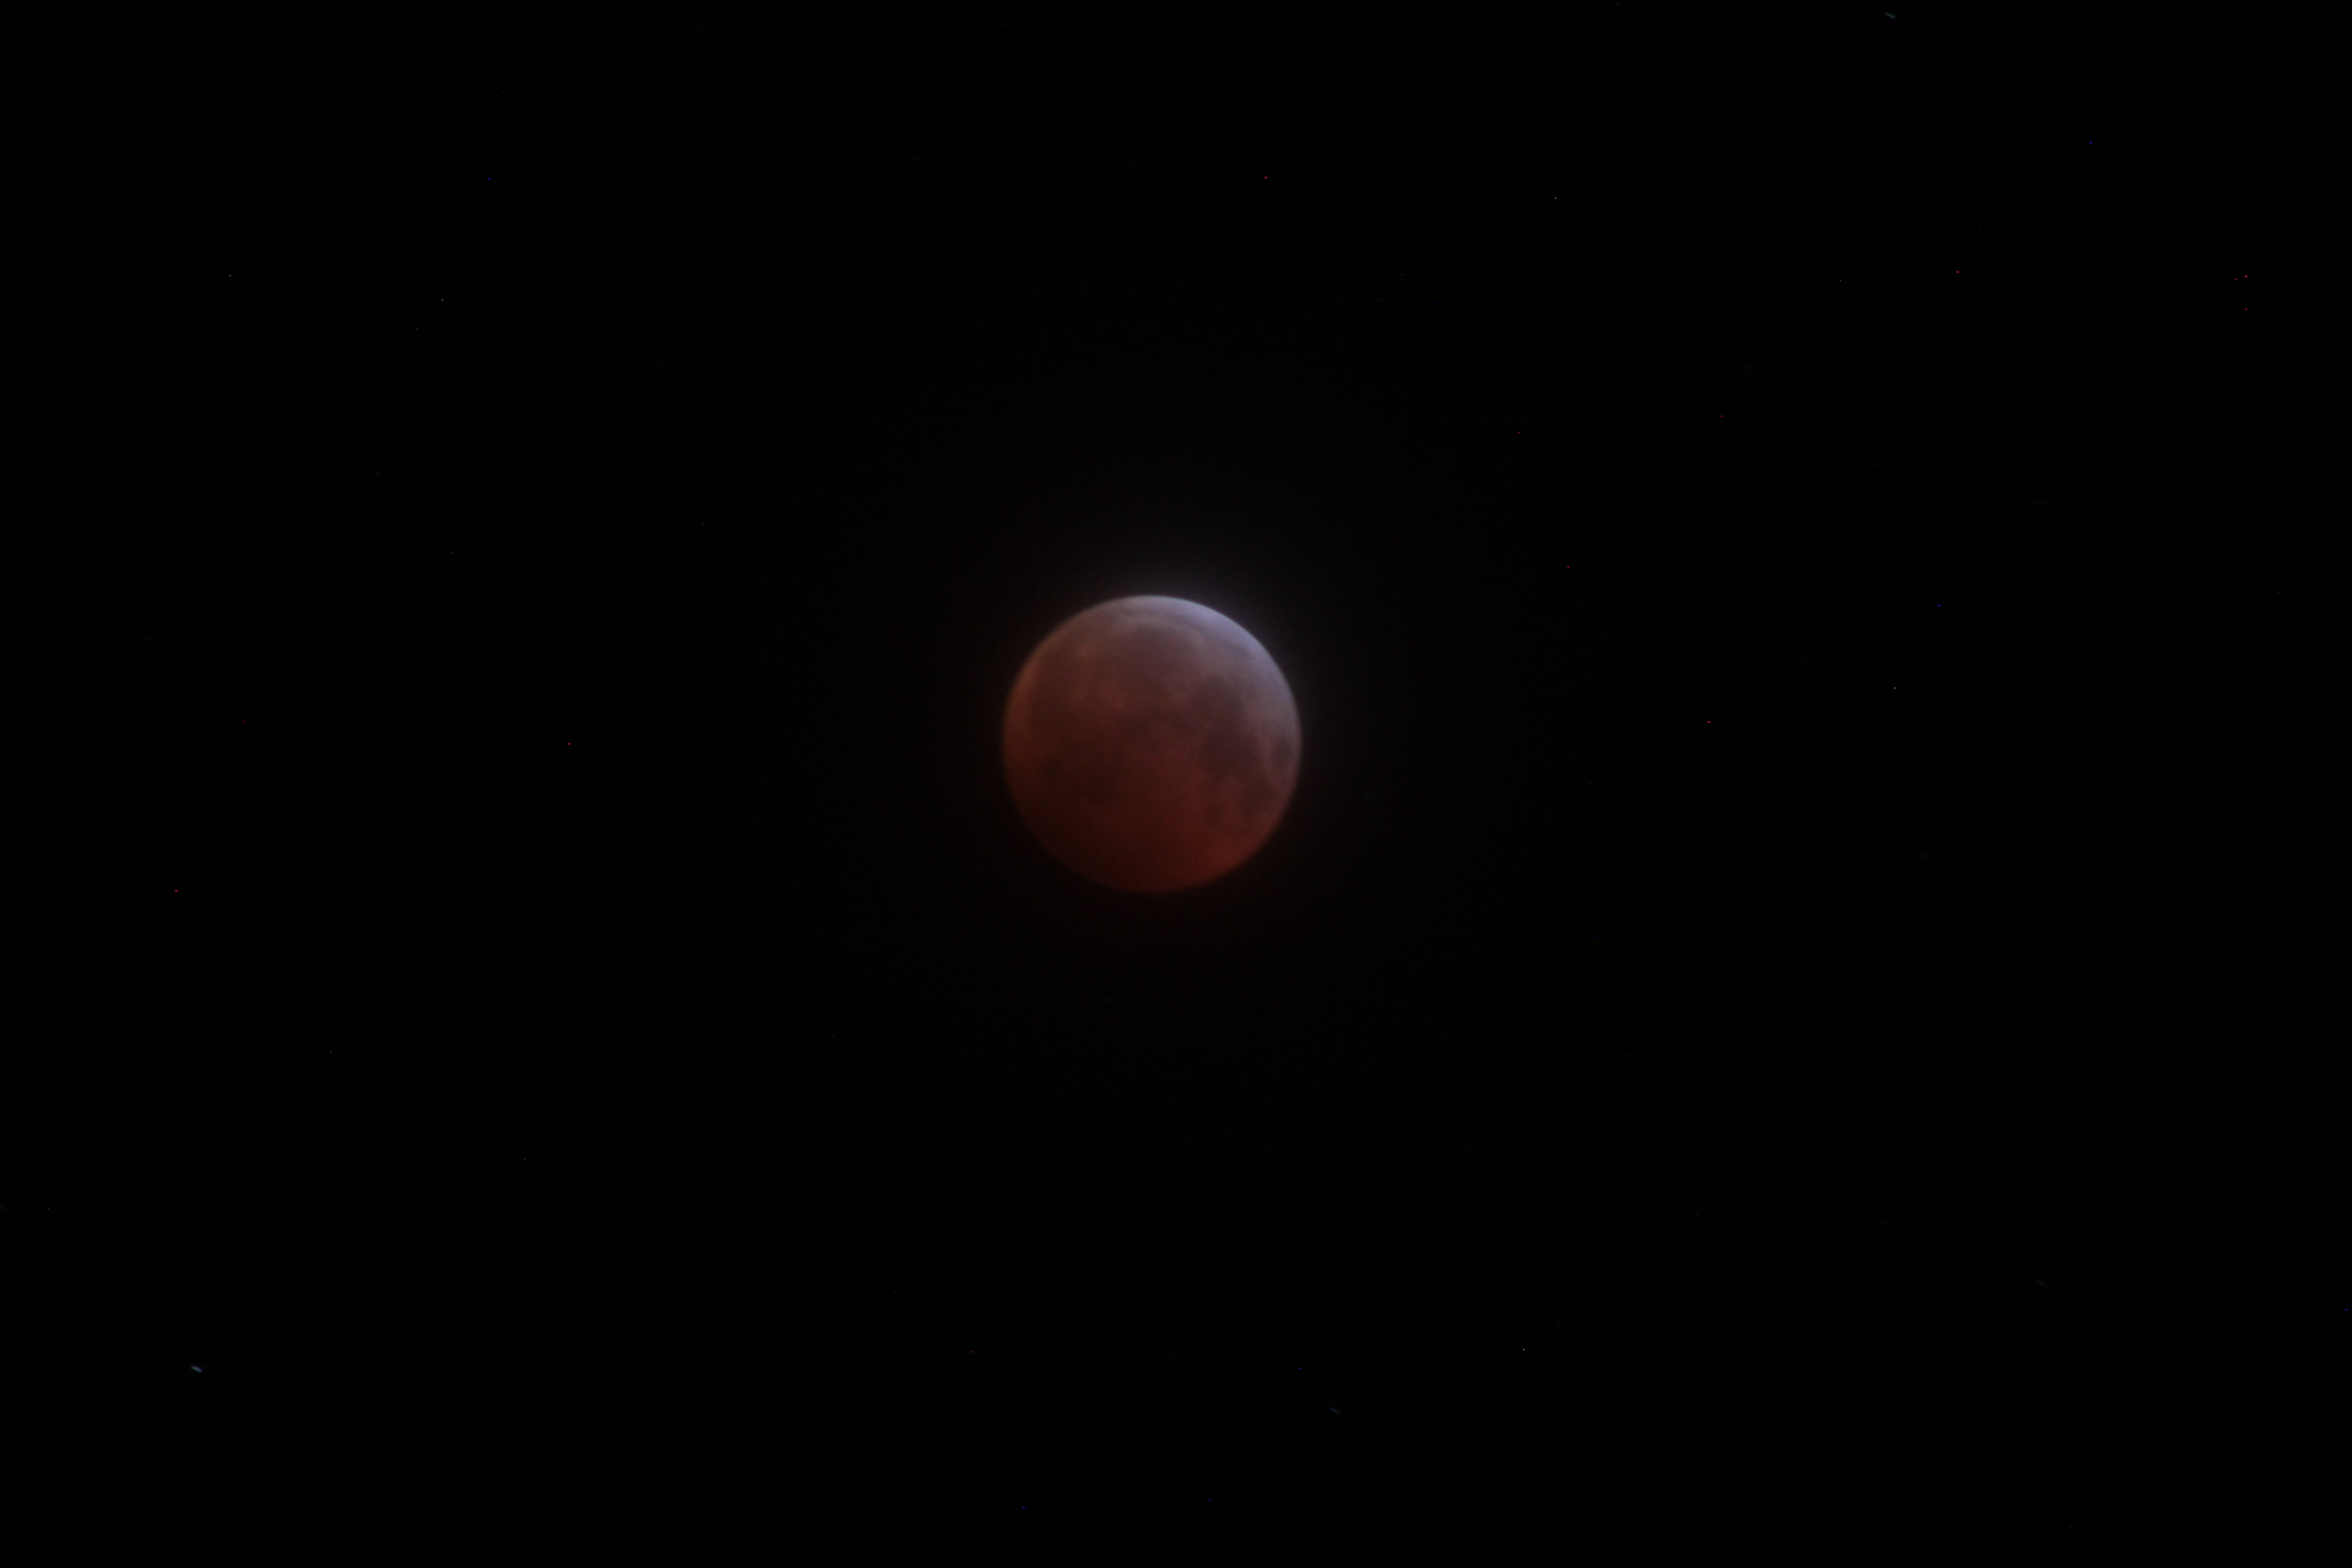 Second image of the Lunar eclipse by Pam